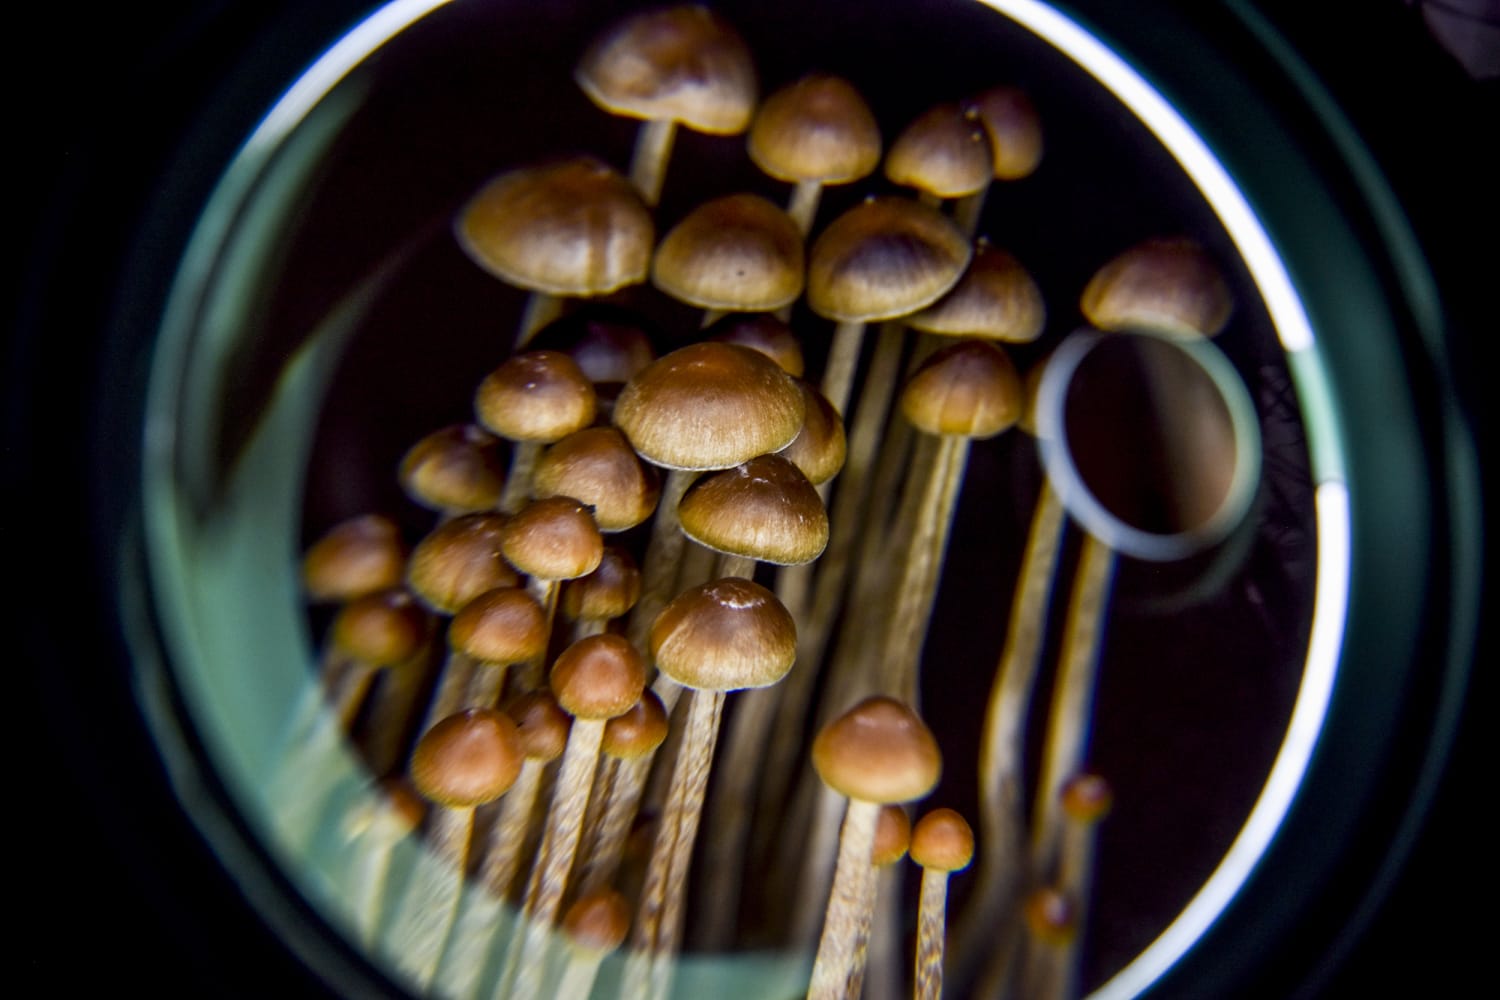 Candidates who support psychedelics as medicine get a political action committee